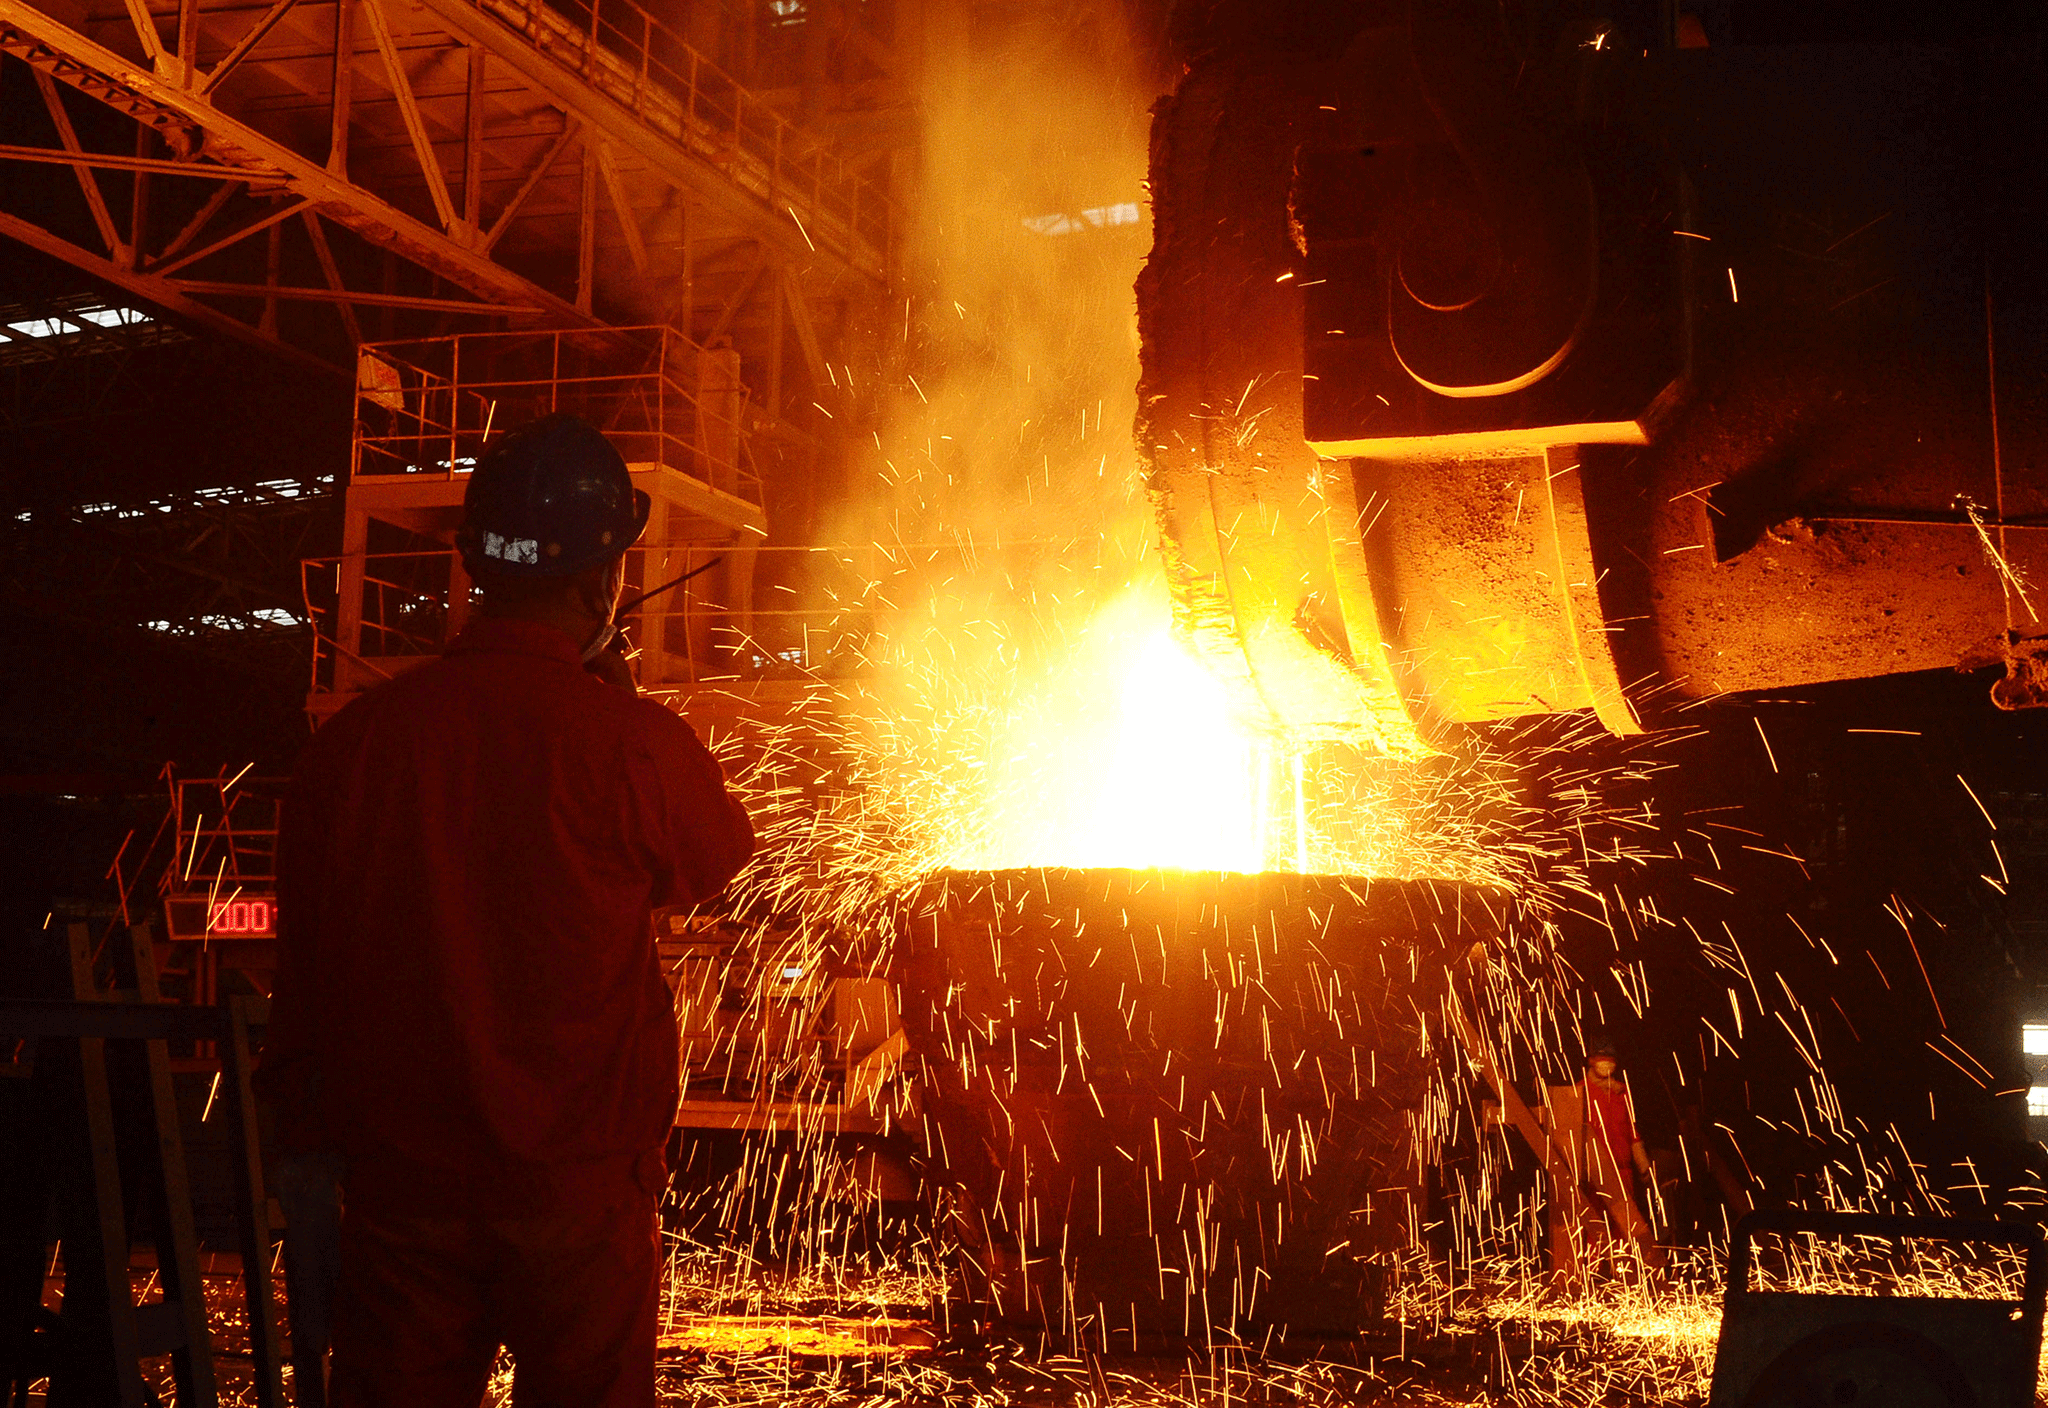 Steel jobs will be saved by the new deal